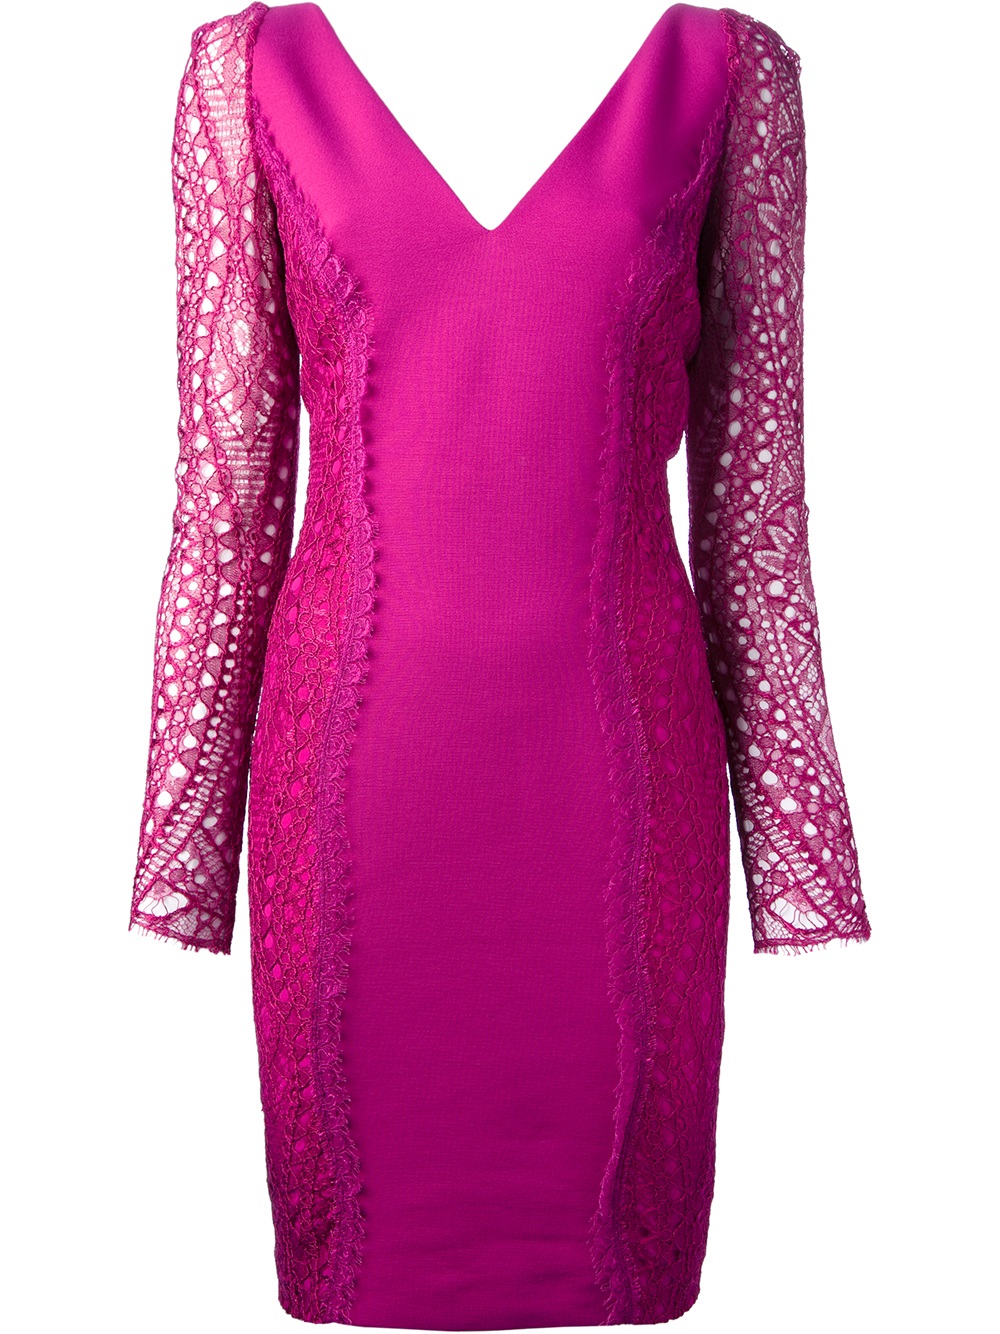 Emilio Pucci Lace Sleeve Dress in Pink (pink & purple) | Lyst